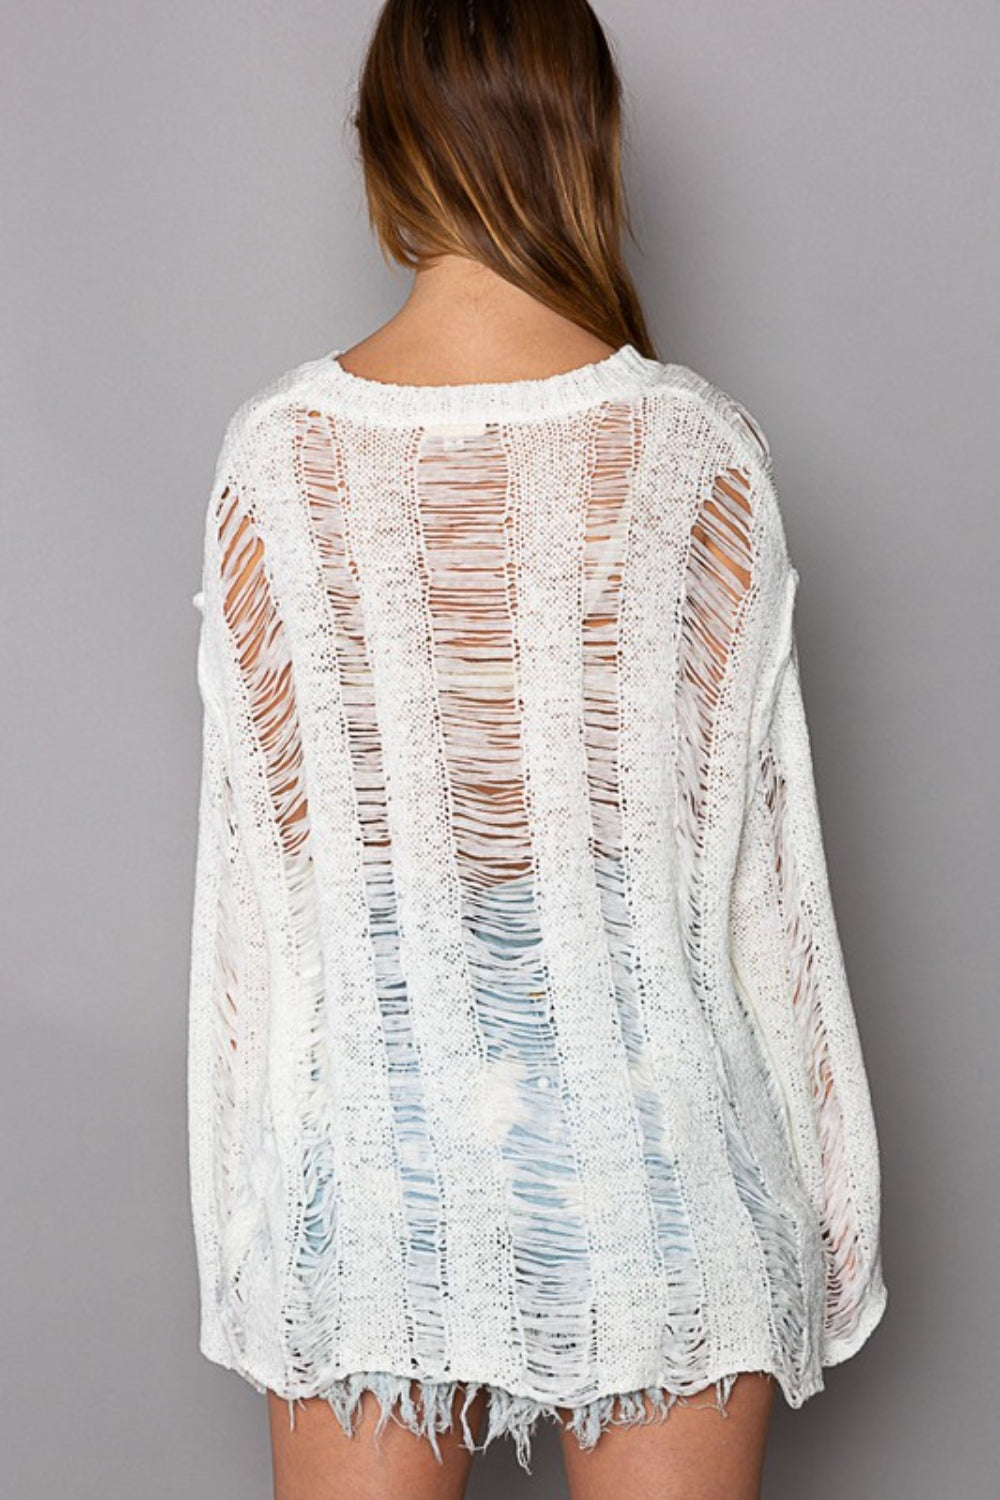 This Distressed Round Neck Long Sleeve Knit Cover Up is a stylish and versatile piece for your wardrobe. The distressed knit detailing adds a trendy and edgy touch to the classic round neck design. S - L